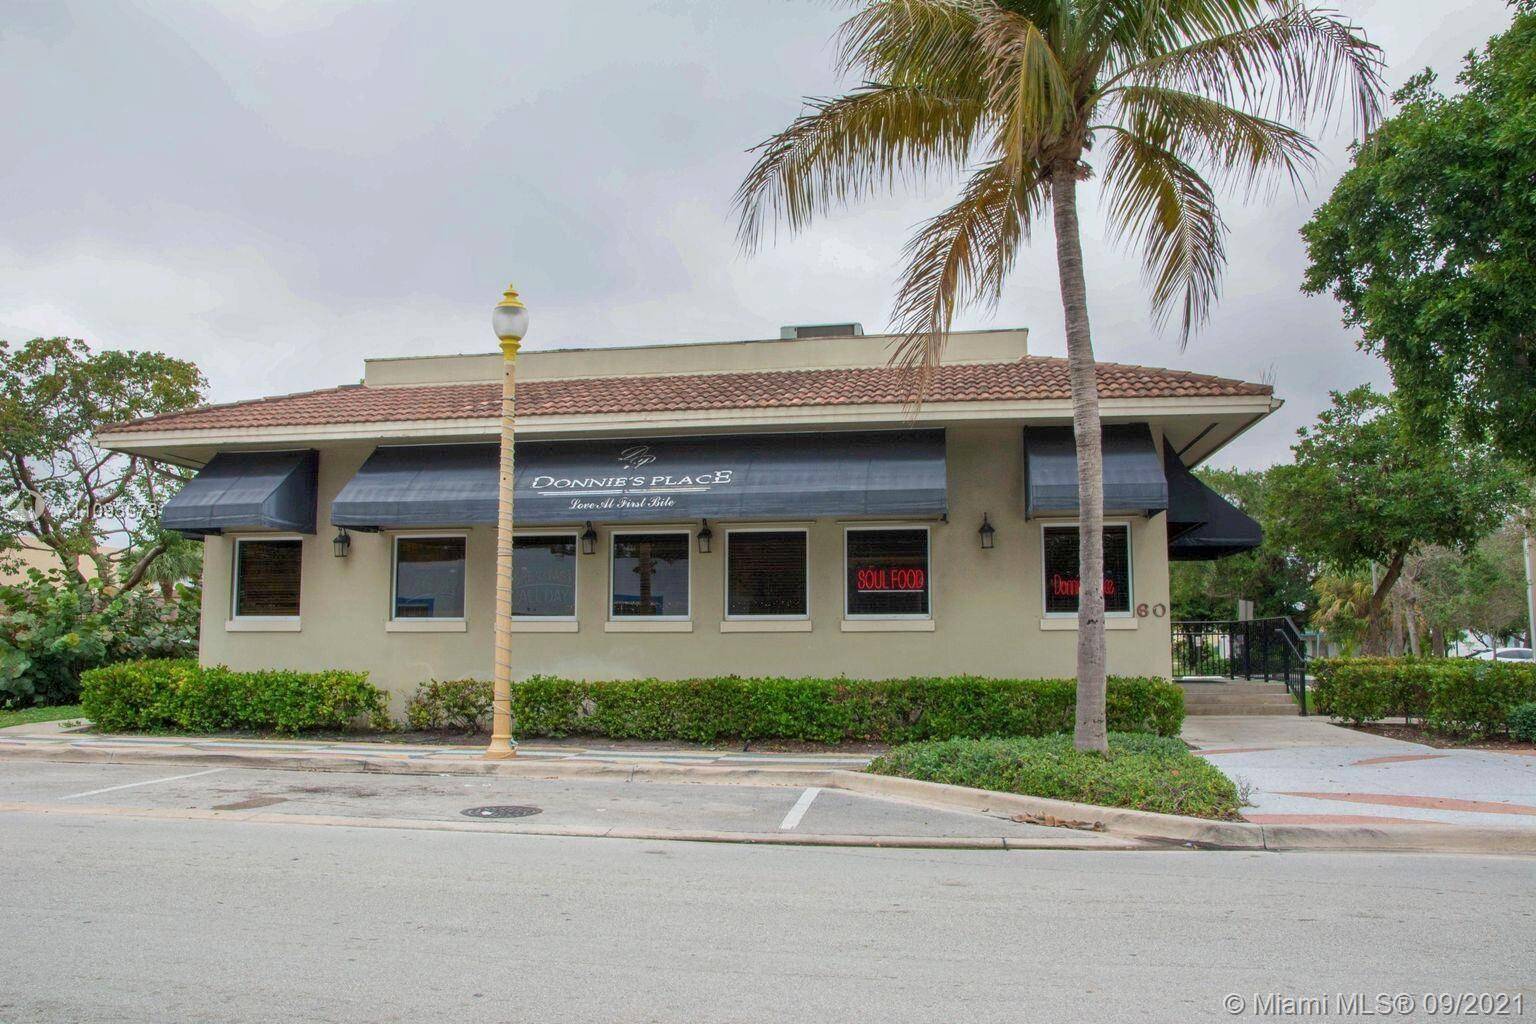 Unique opportunity to Lease GENERAL COMMERCIAL RESTAURANT RETAIL located within DOWNTOWN, DELRAY BEACH, FL.